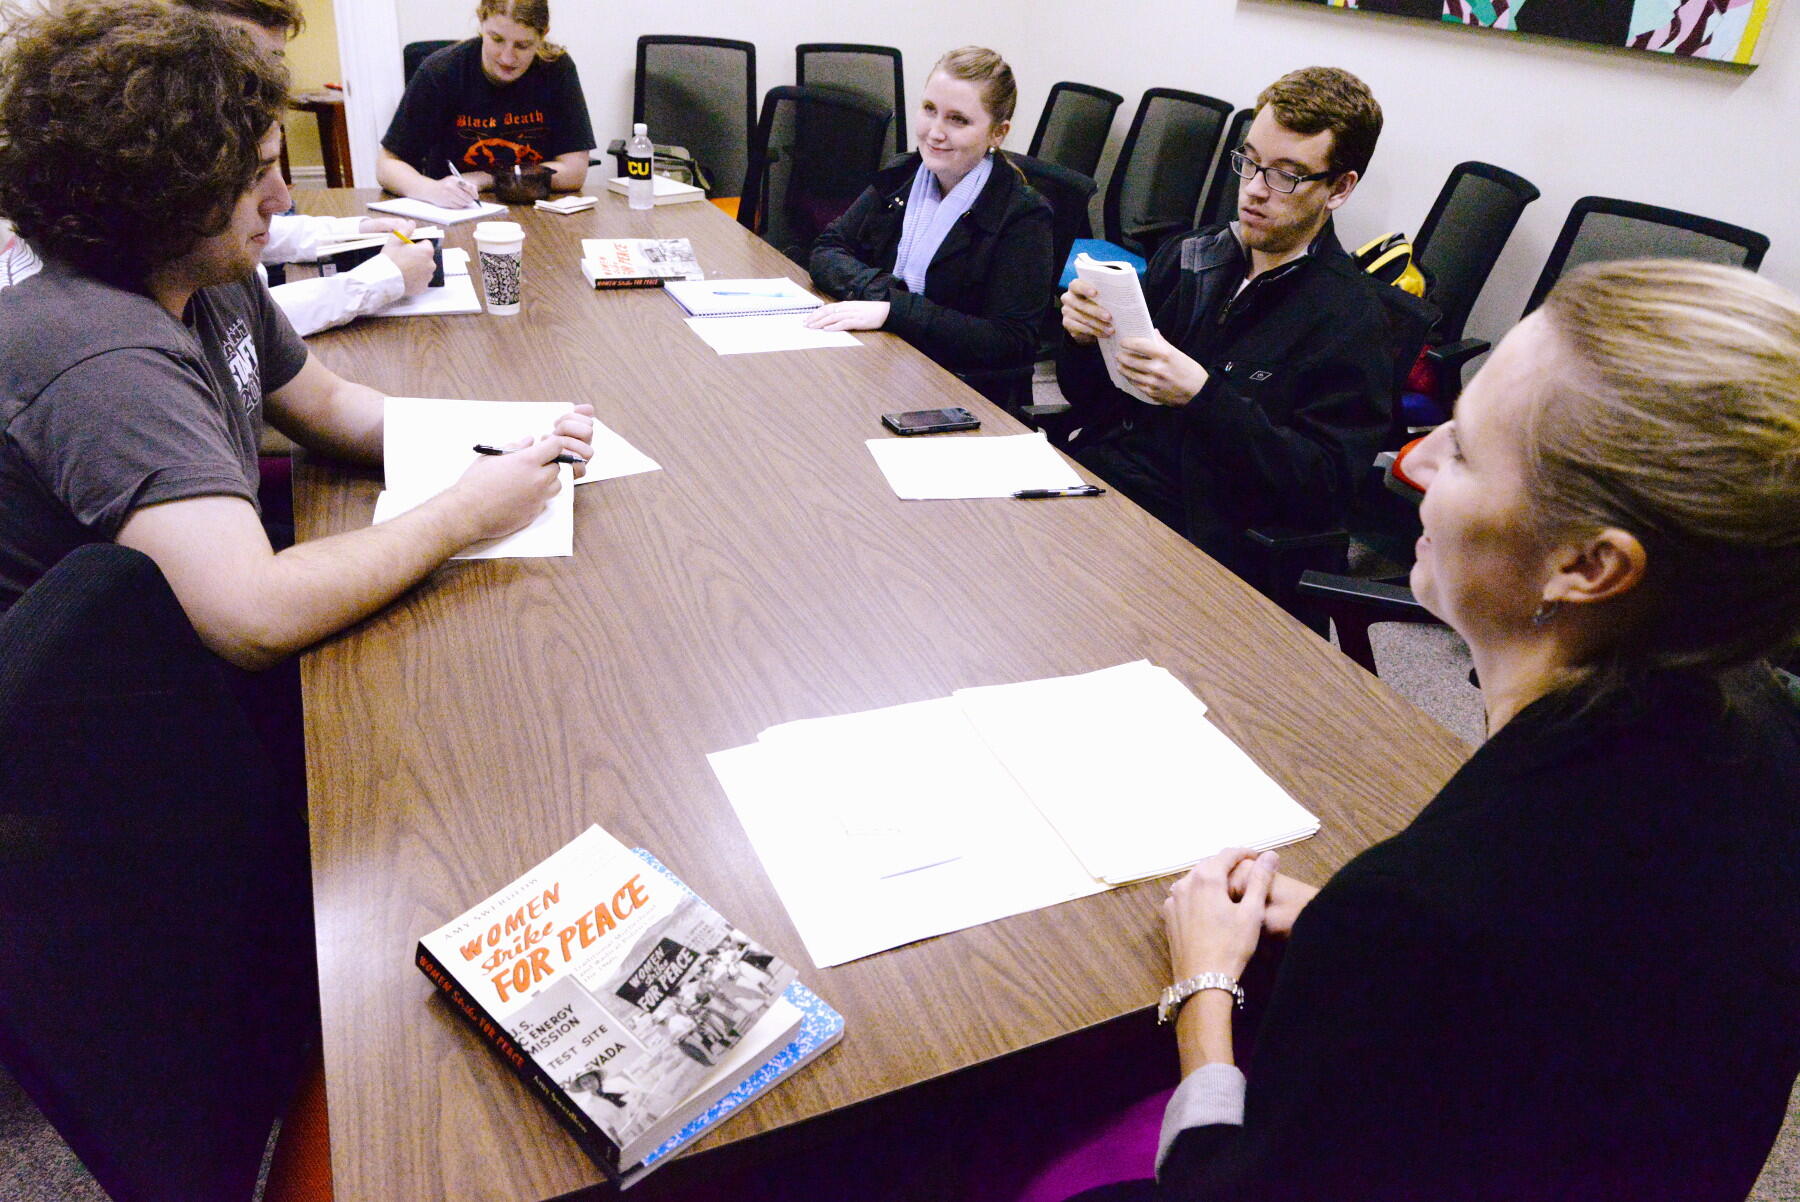 A group of people with books and notebooks seated around a table.